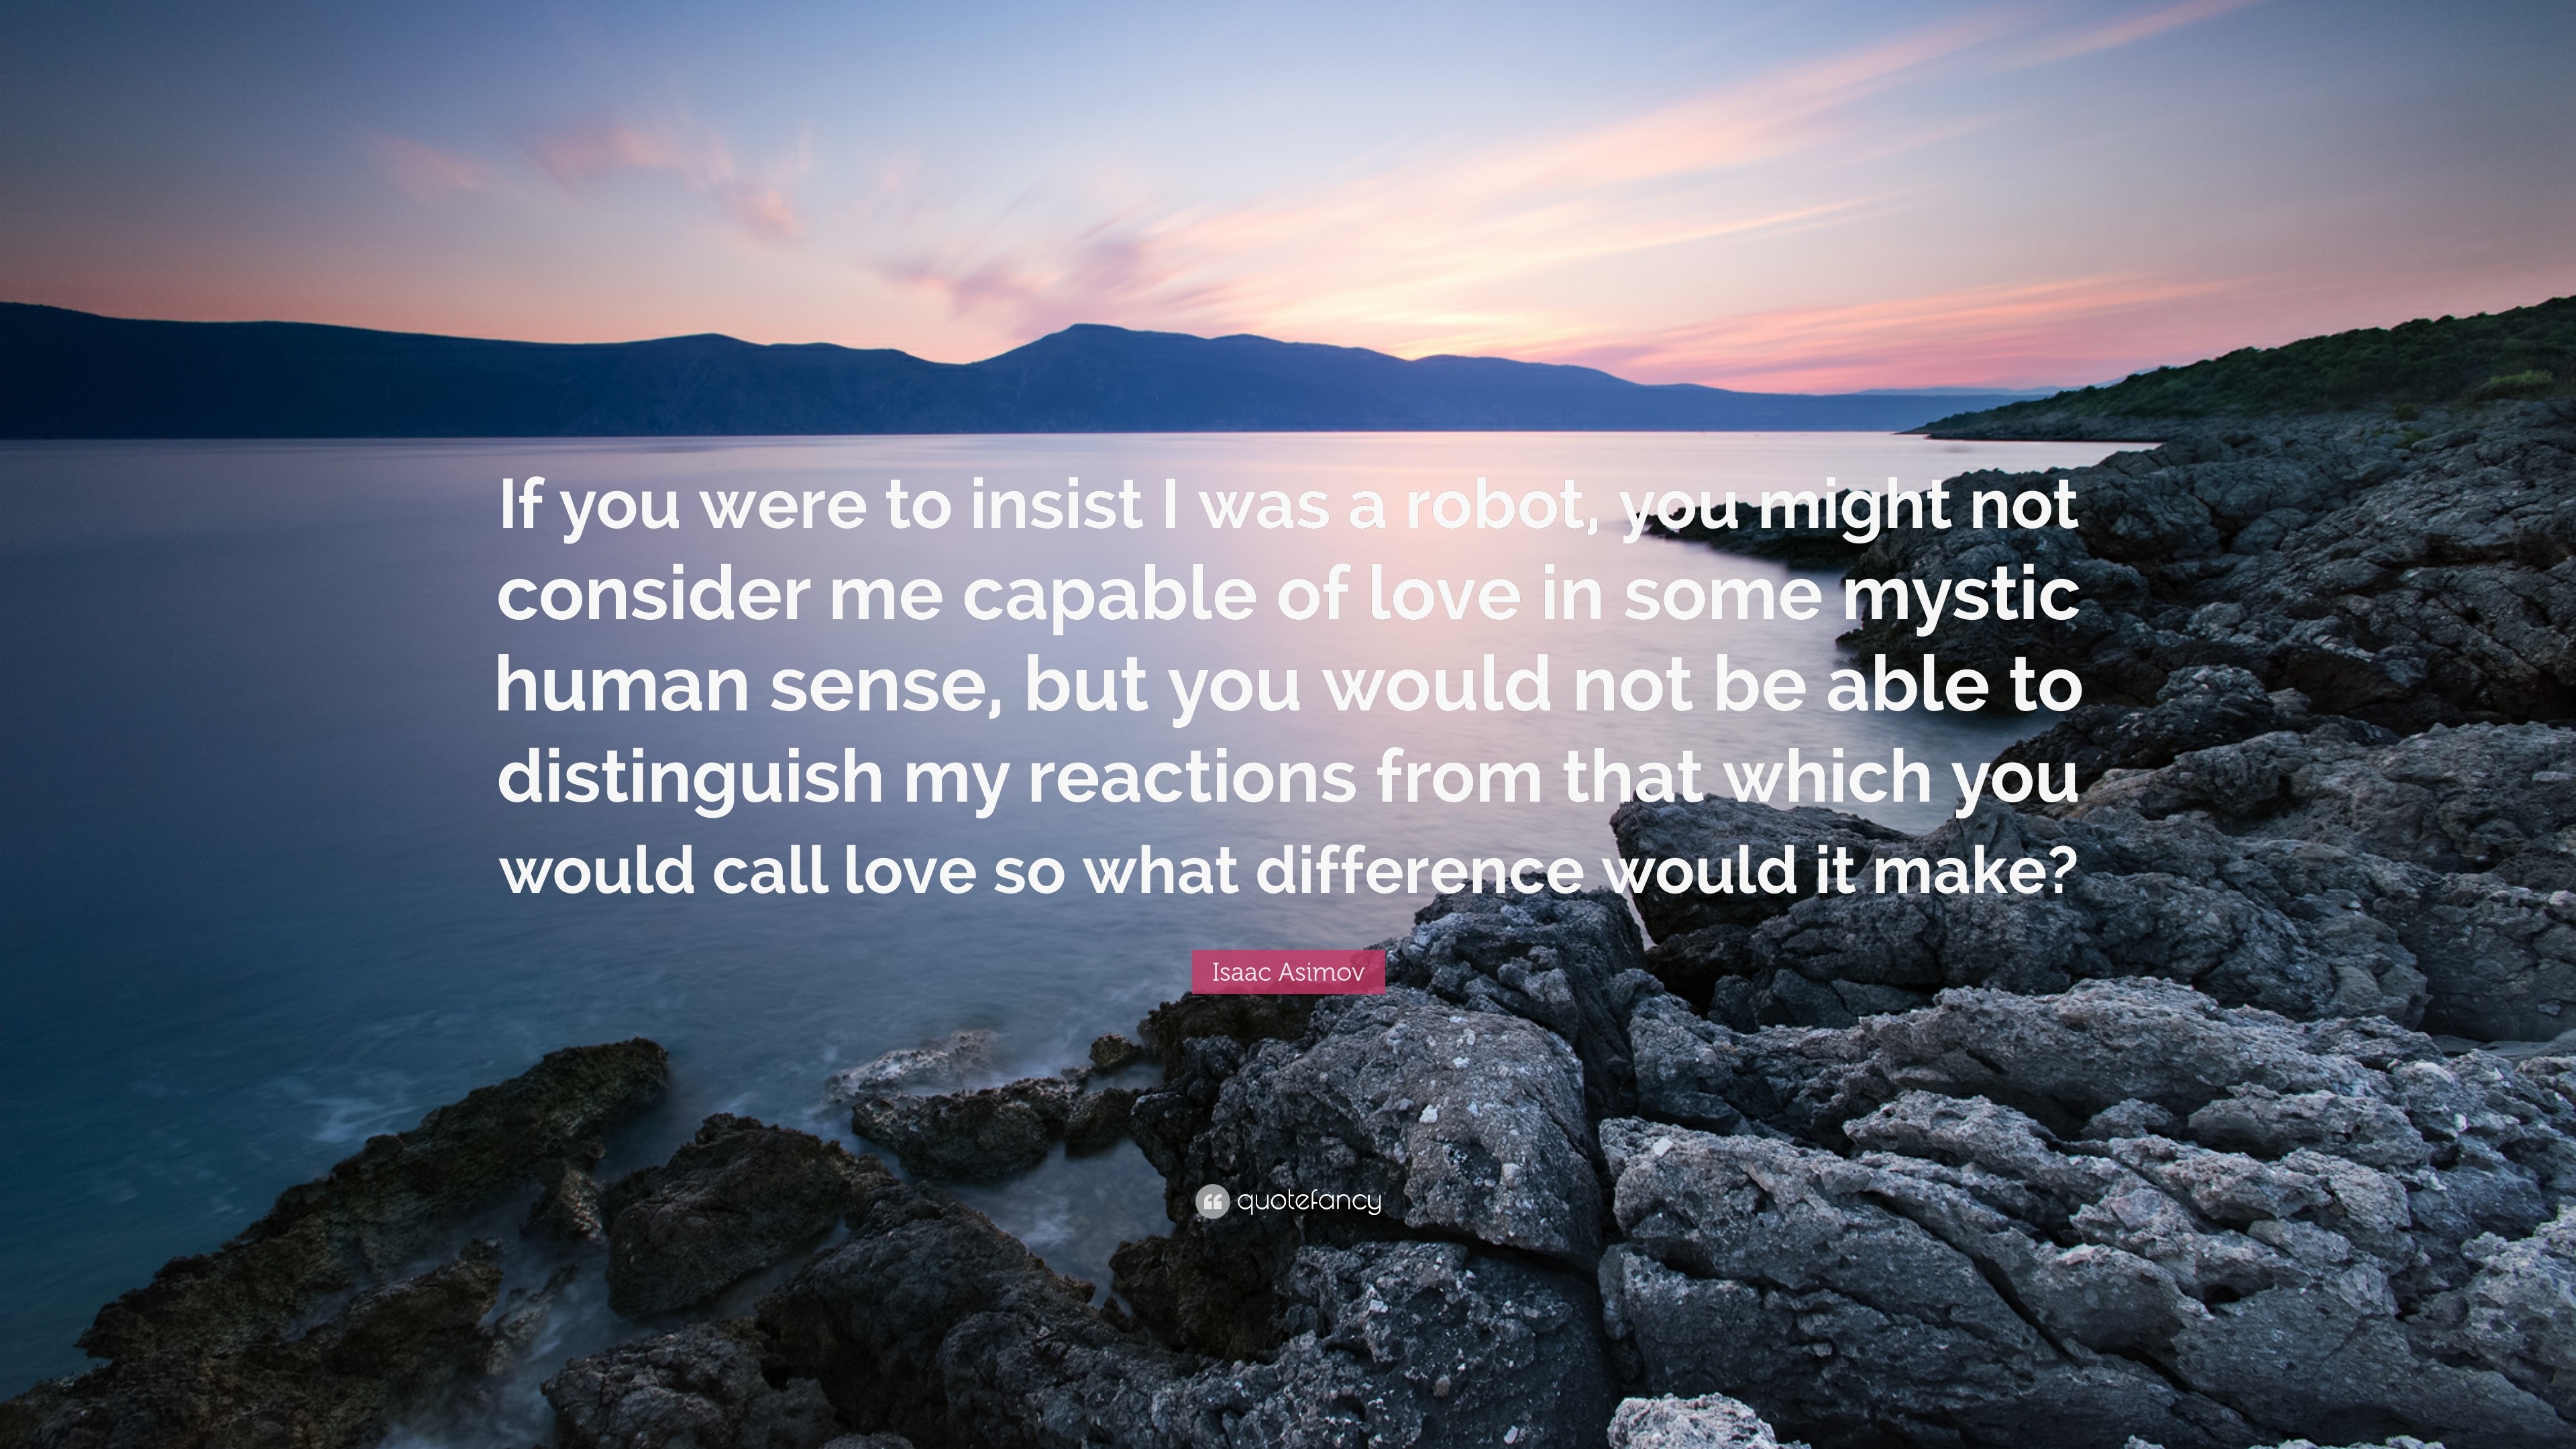 dans Omgivelser smertefuld Isaac Asimov Quote: “If you were to insist I was a robot, you might not  consider me capable of love in some mystic human sense, but you would...”